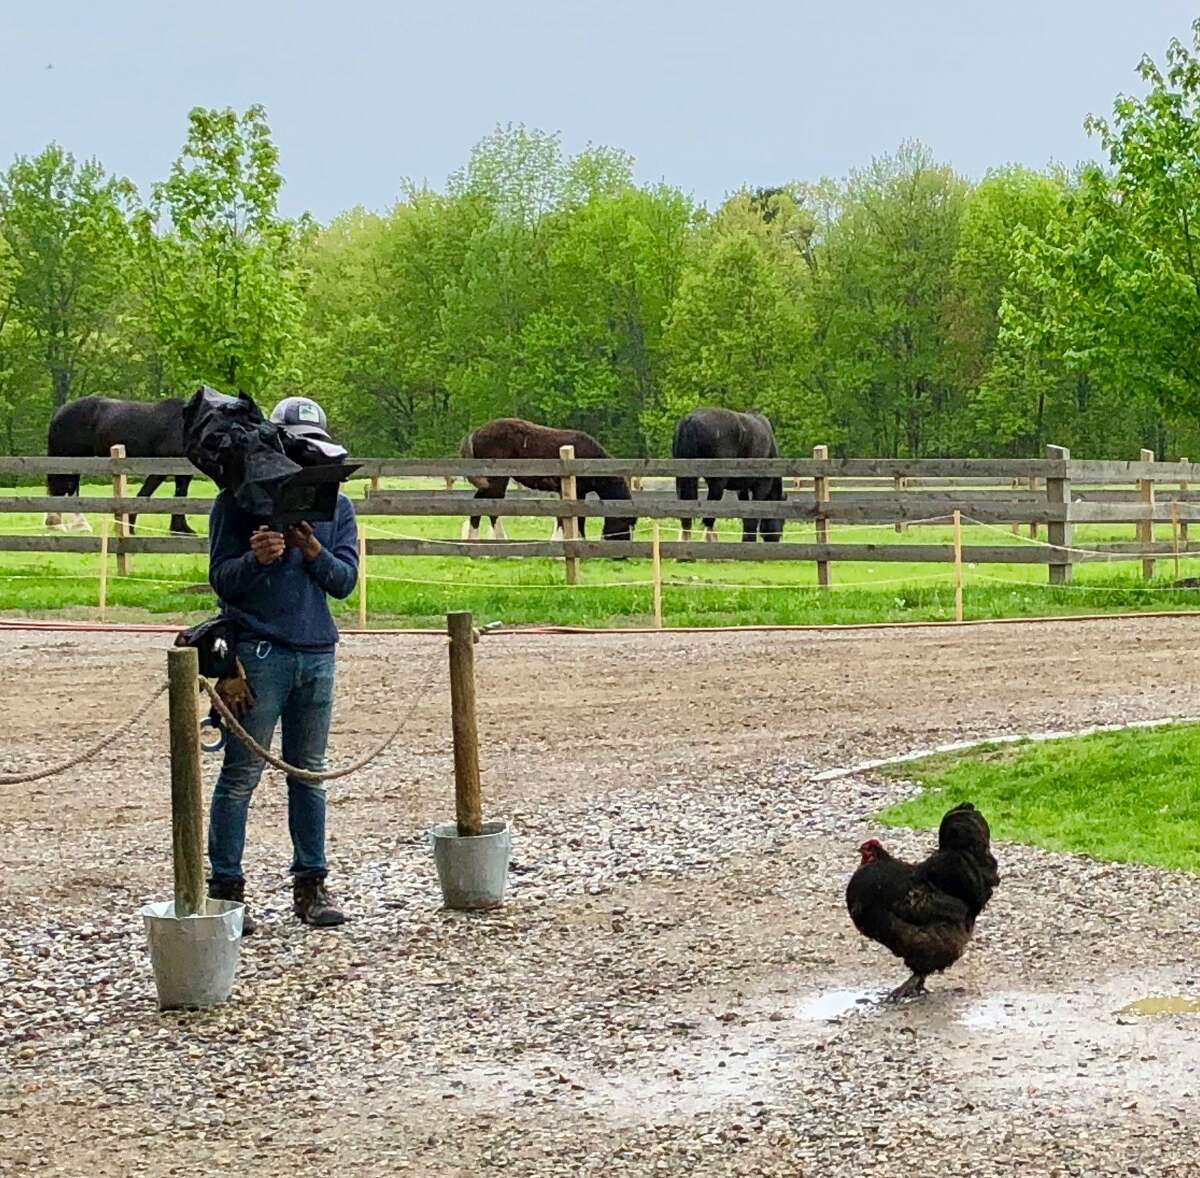 Cameraman and chicken during shooting at June Farms for “Backyard Envy.”